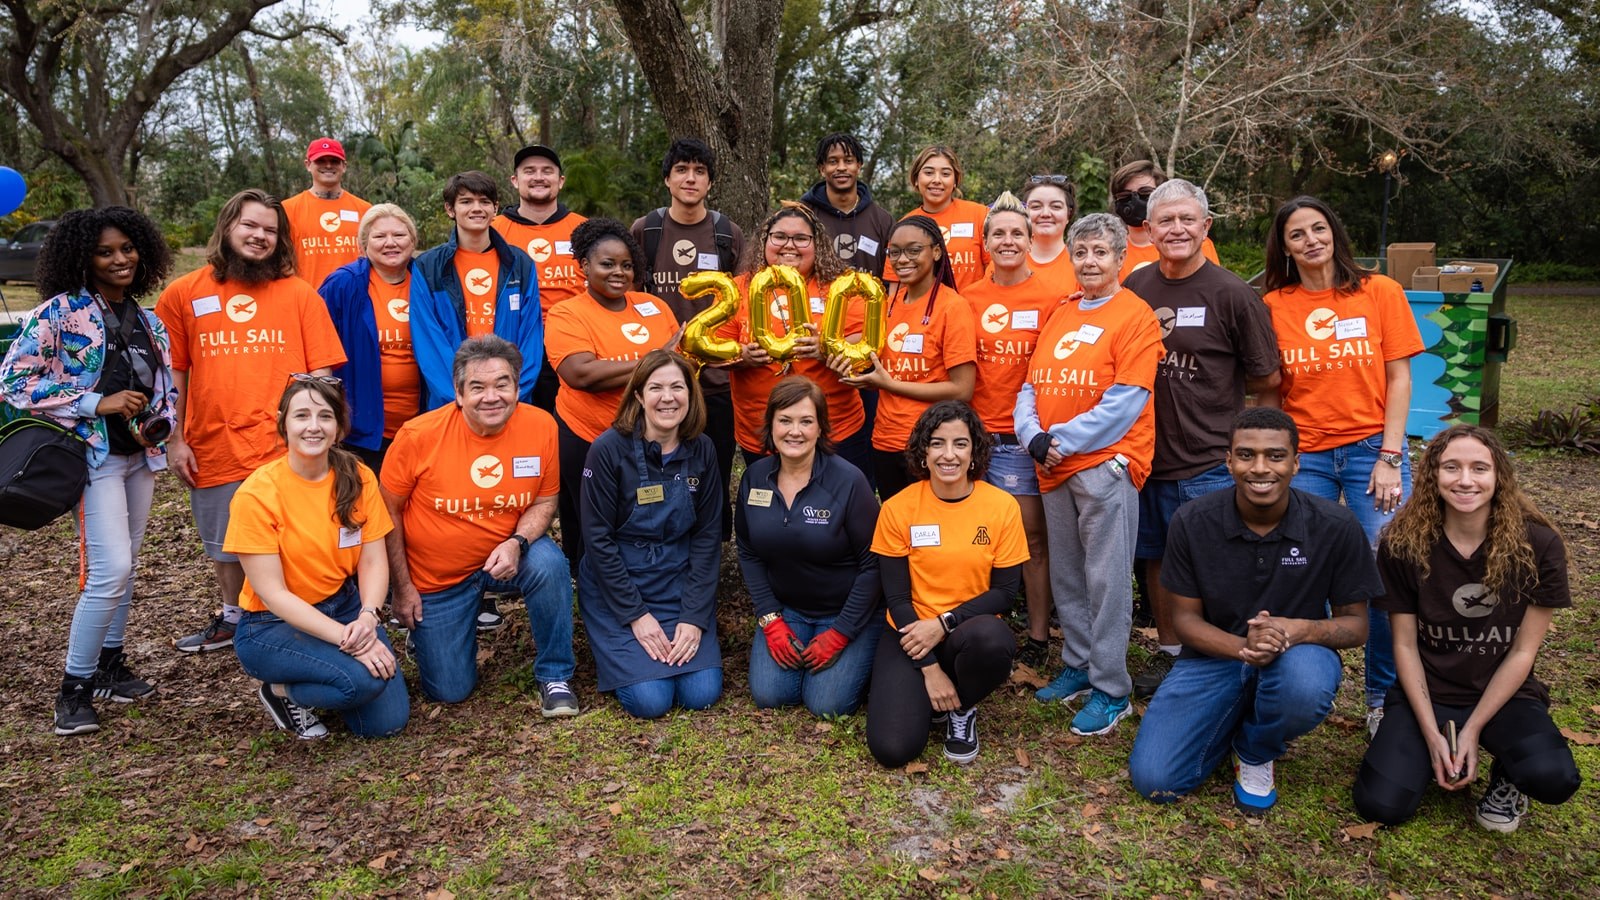 A group photo of students and staff wearing bright orange Full Sail University t-shirts. They are also holding golden balloons that spell 200.